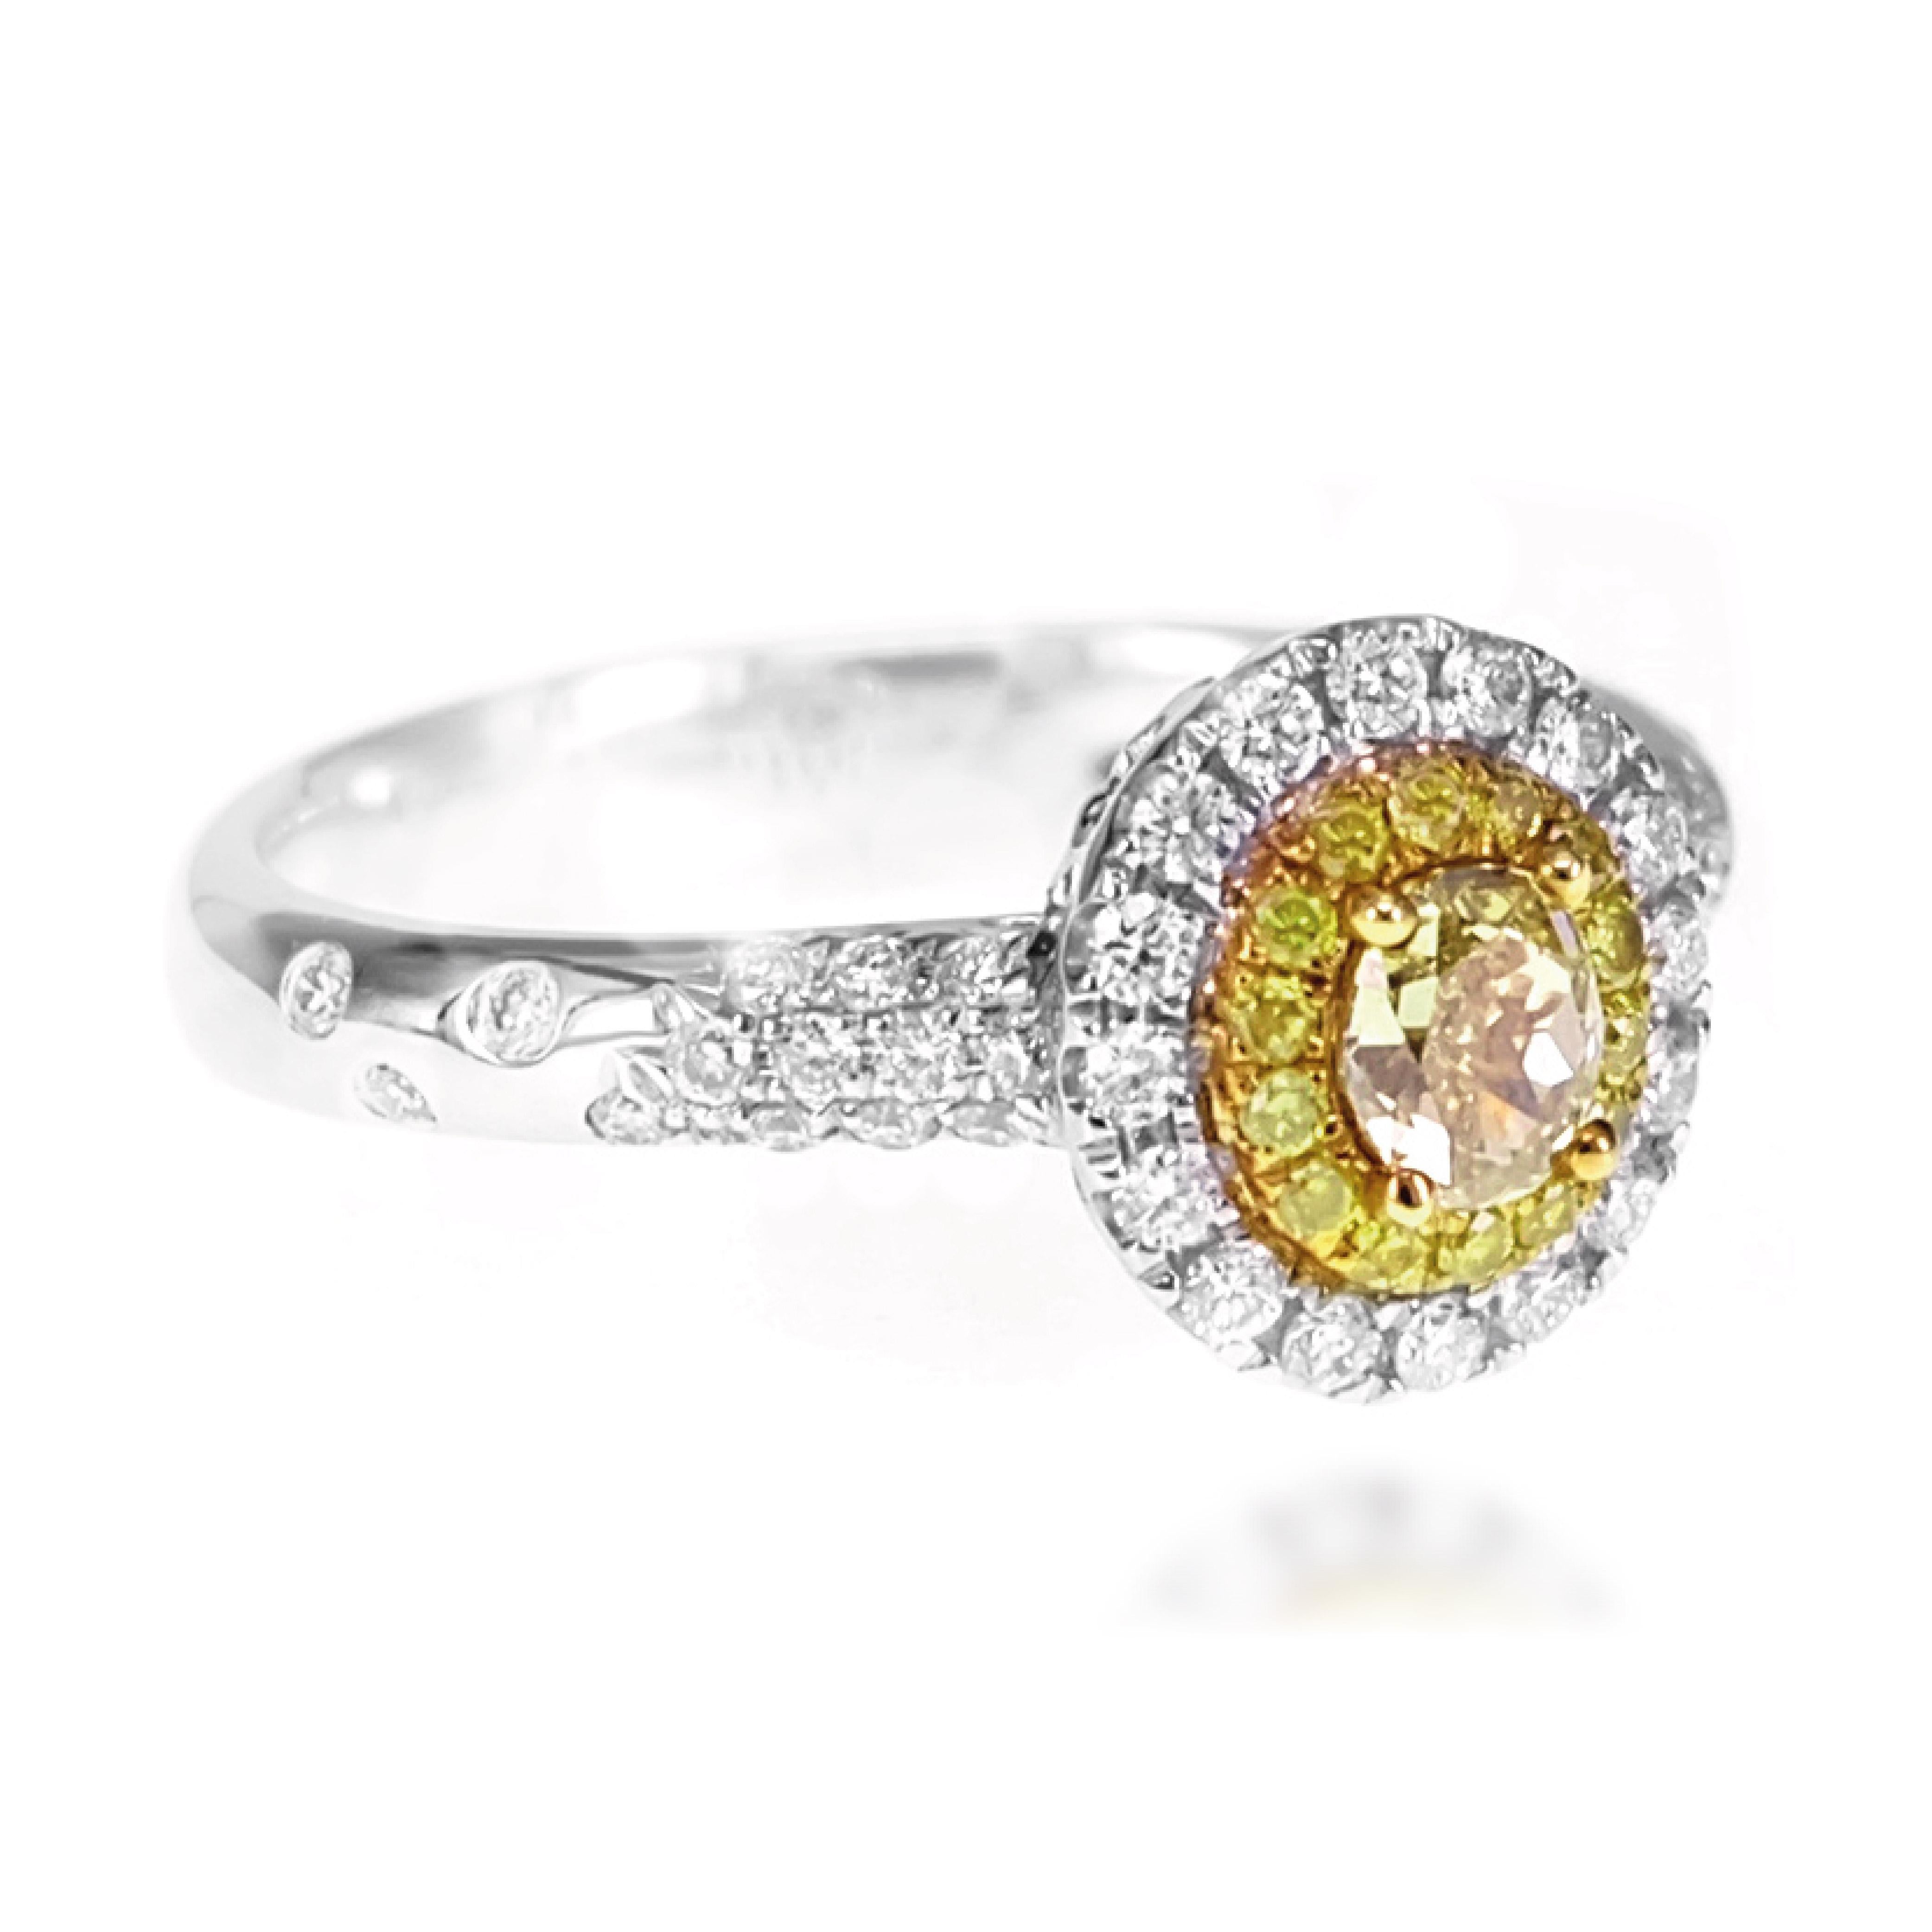 Art Nouveau Solitaire Ring Consisting Intense Yellow and White Diamond For Sale